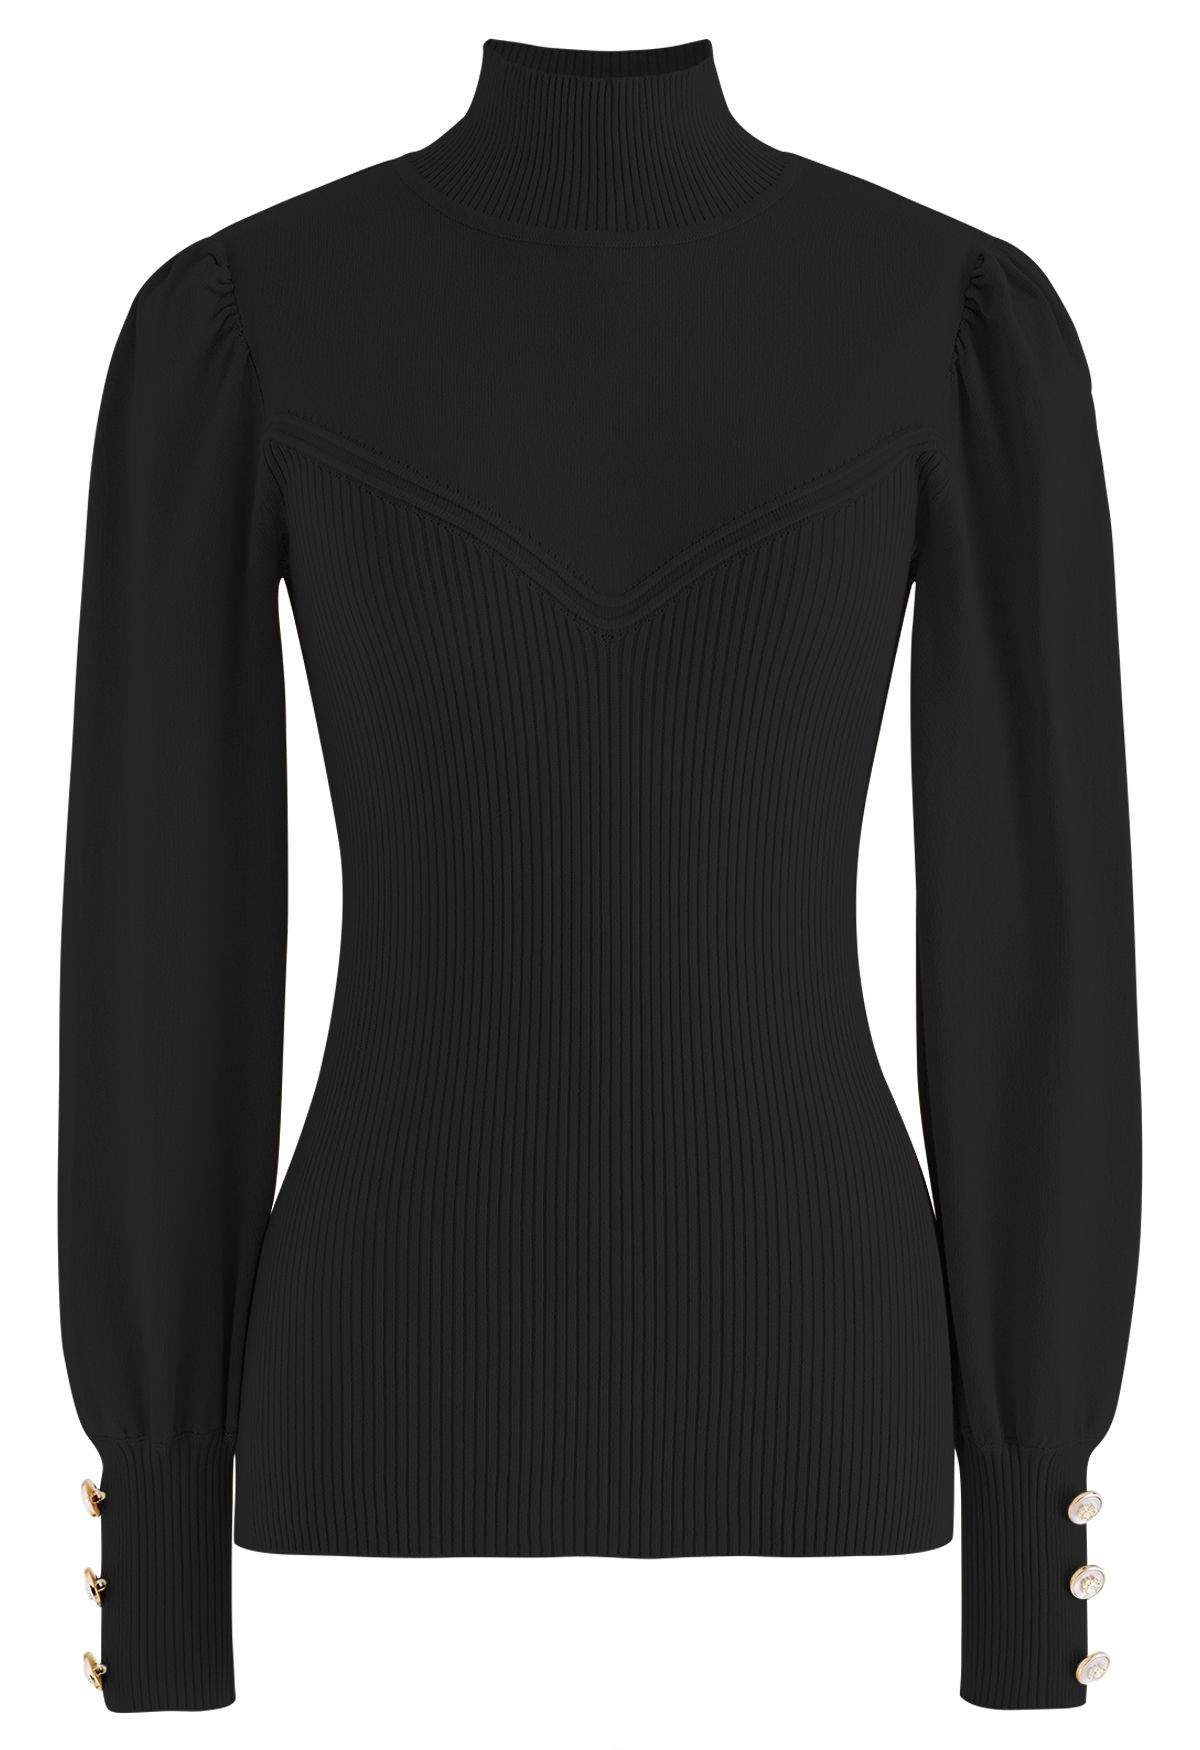 Rib Splicing Fitted Soft Knit Sweater in Black